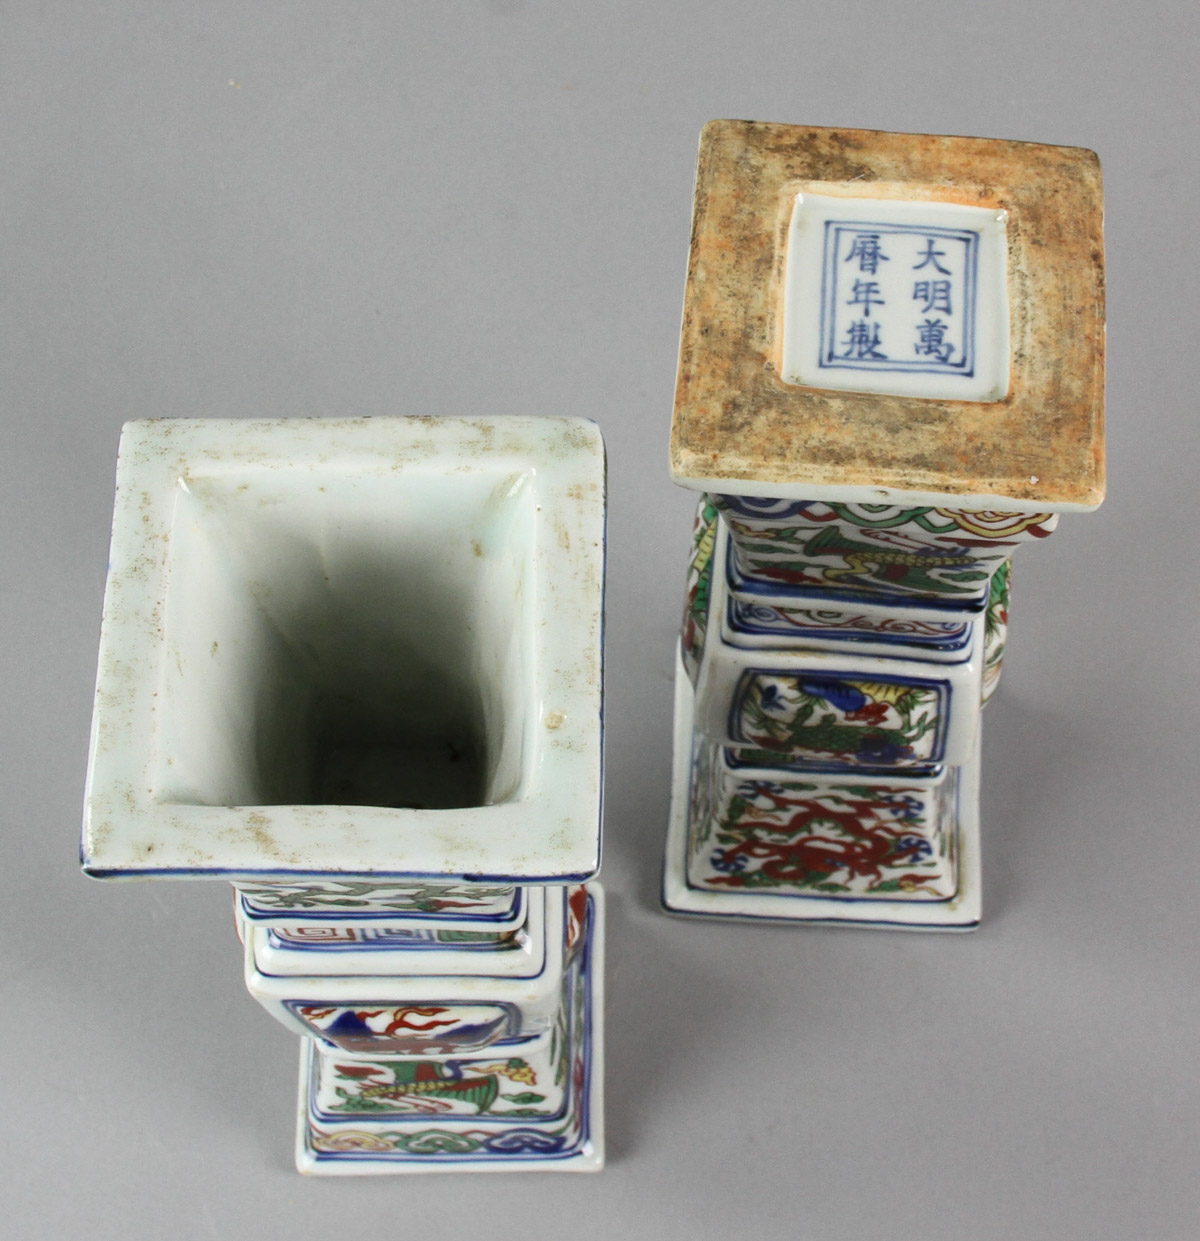 Pair of Chinese Famille Verte square-shaped porcelain vases with marks, 10" H. - Image 12 of 12